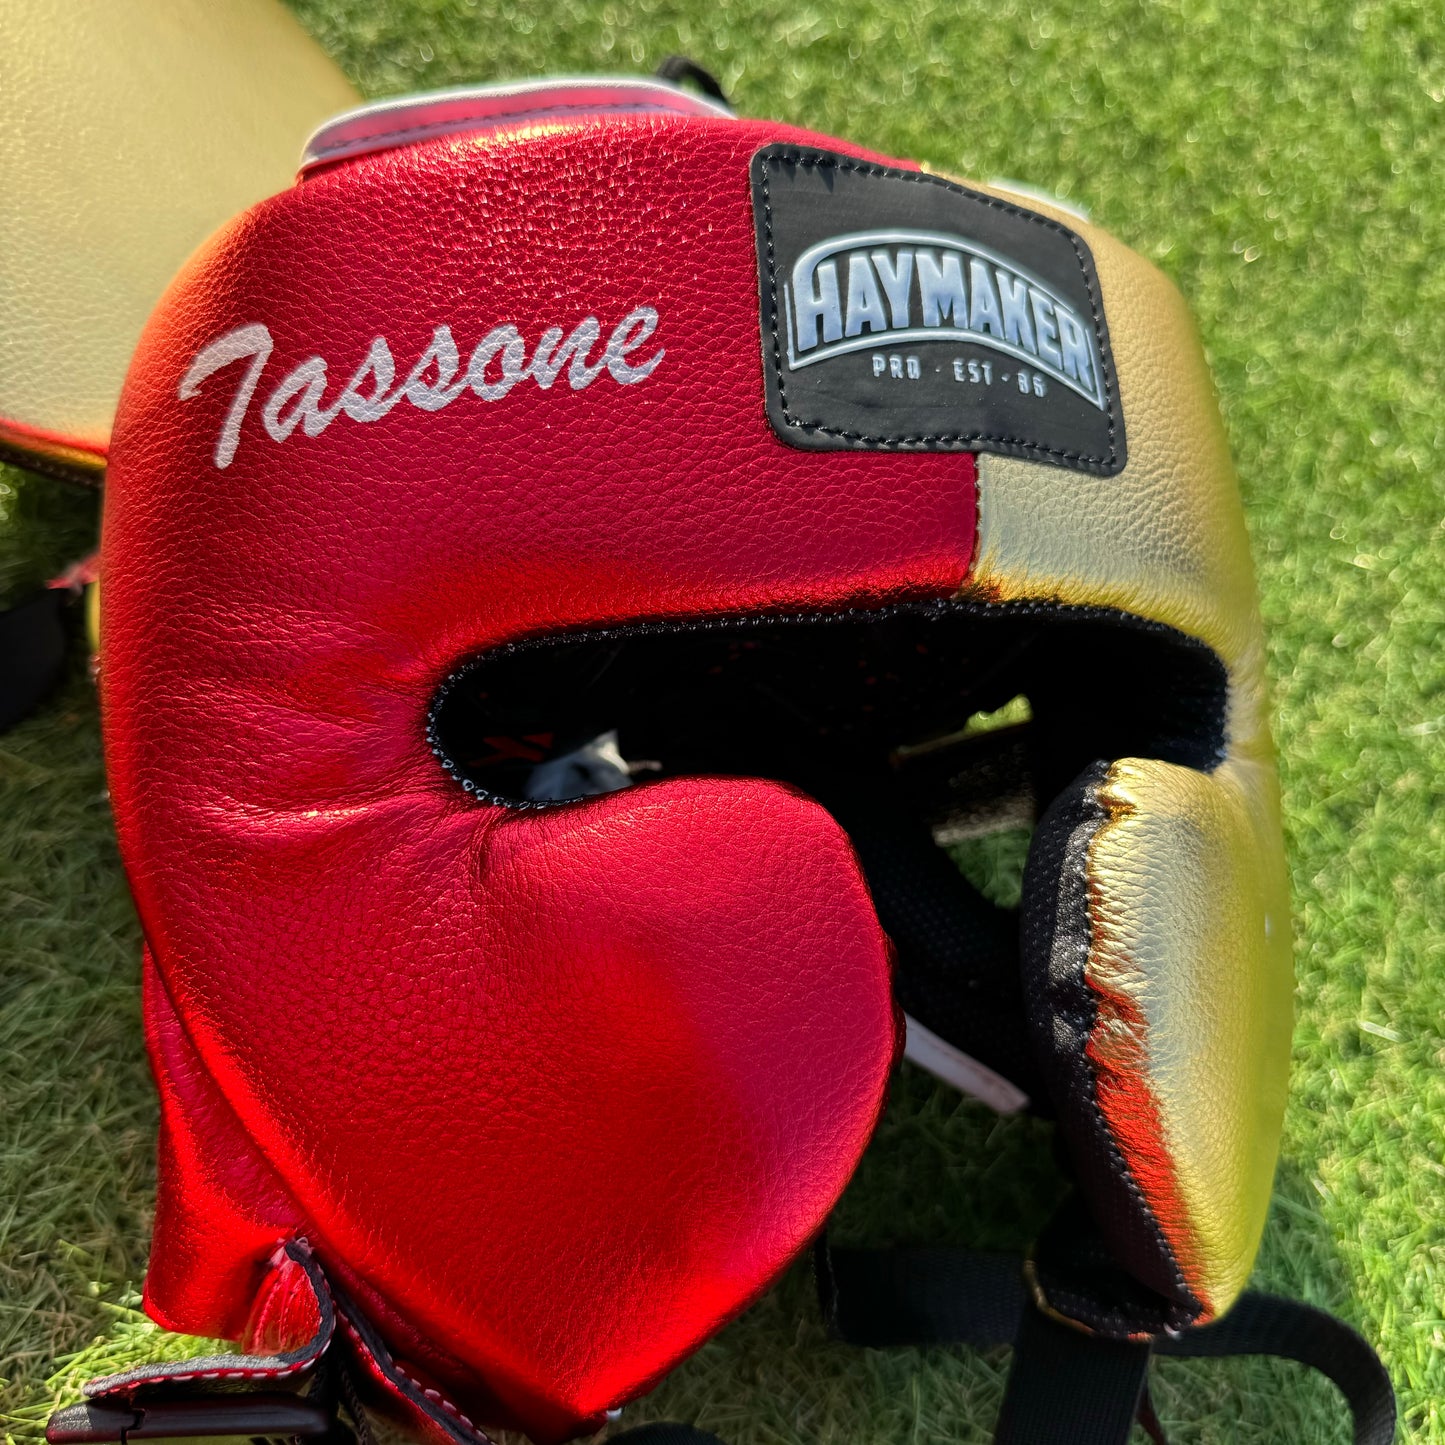 METALLIC RED & GOLD | SPARRING SET | 100% LEATHER